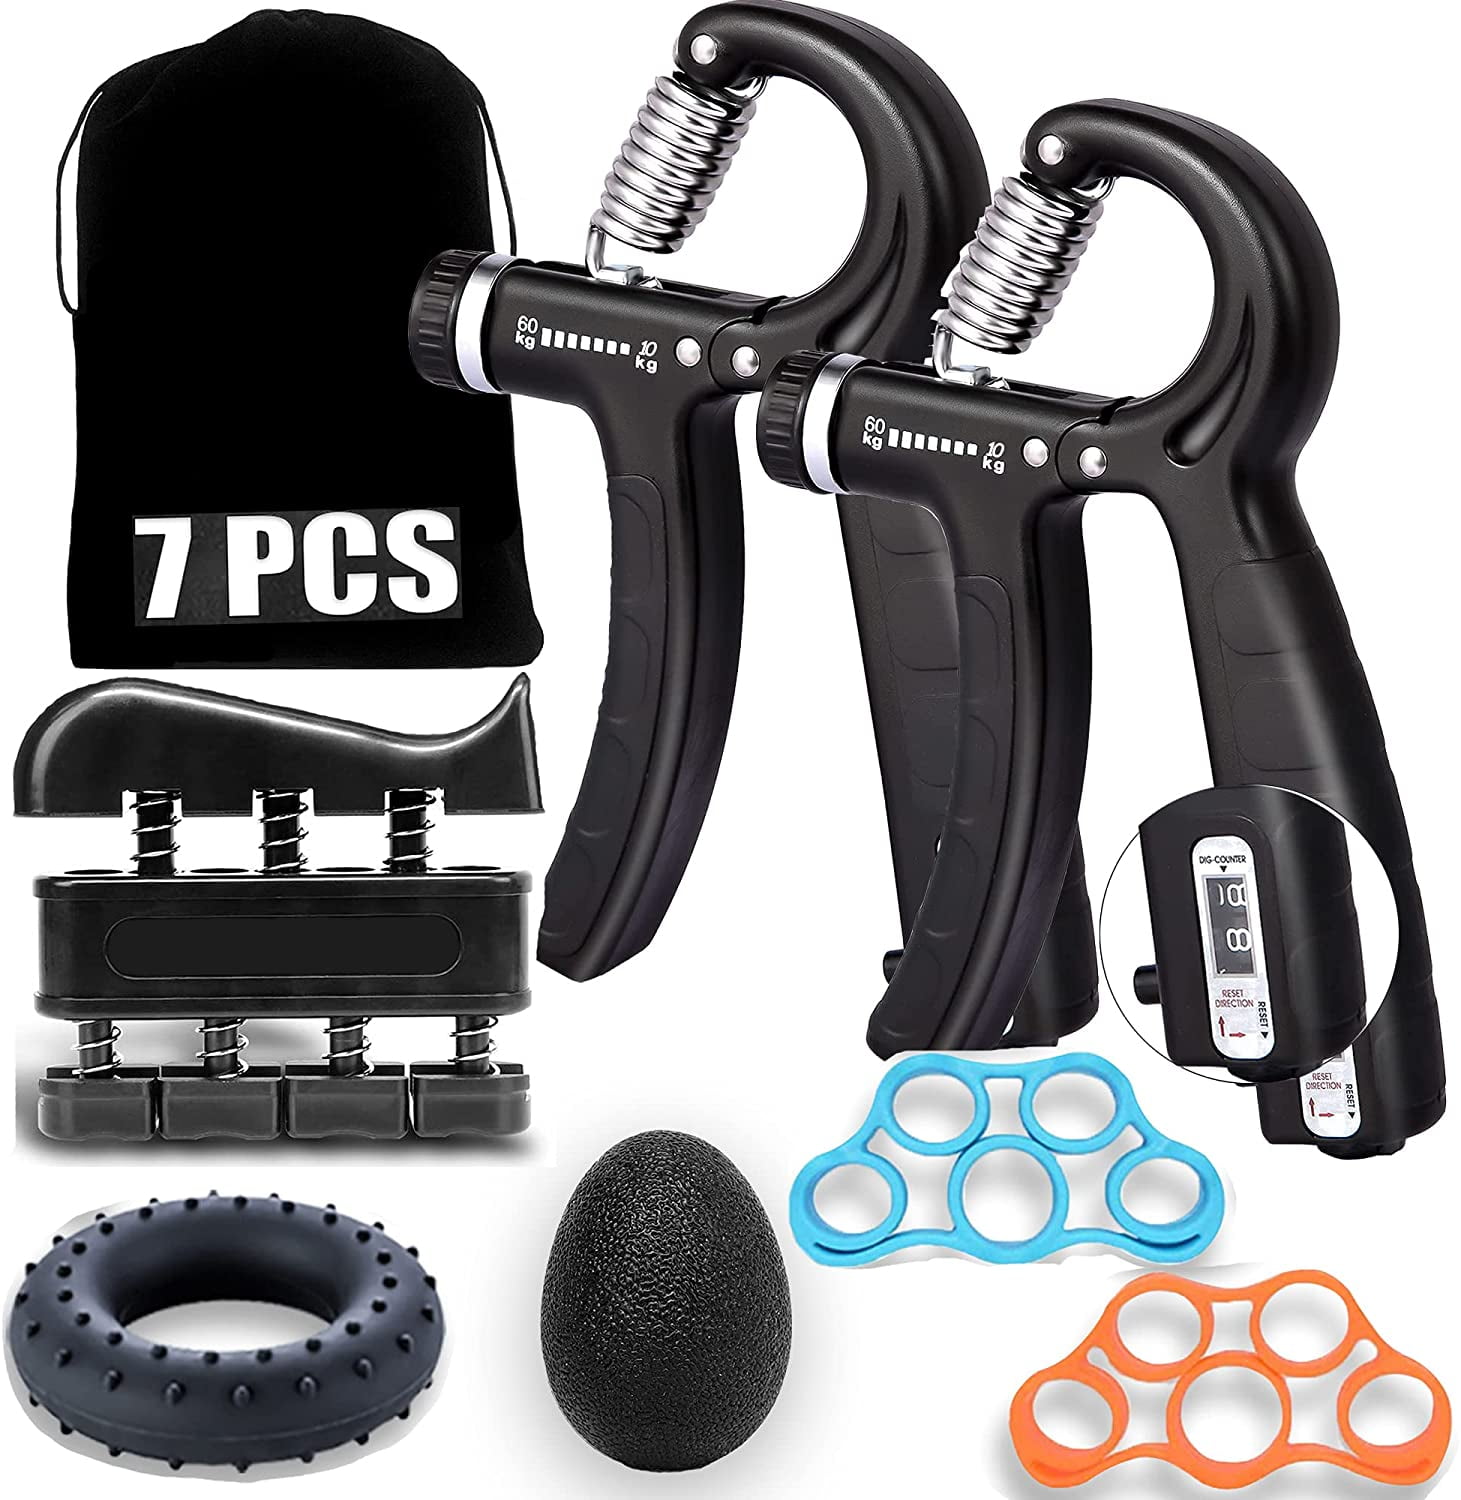 QY 2 Pcs Hand Grip Strengthener Forearm Training Adjustable Counting Grip for 